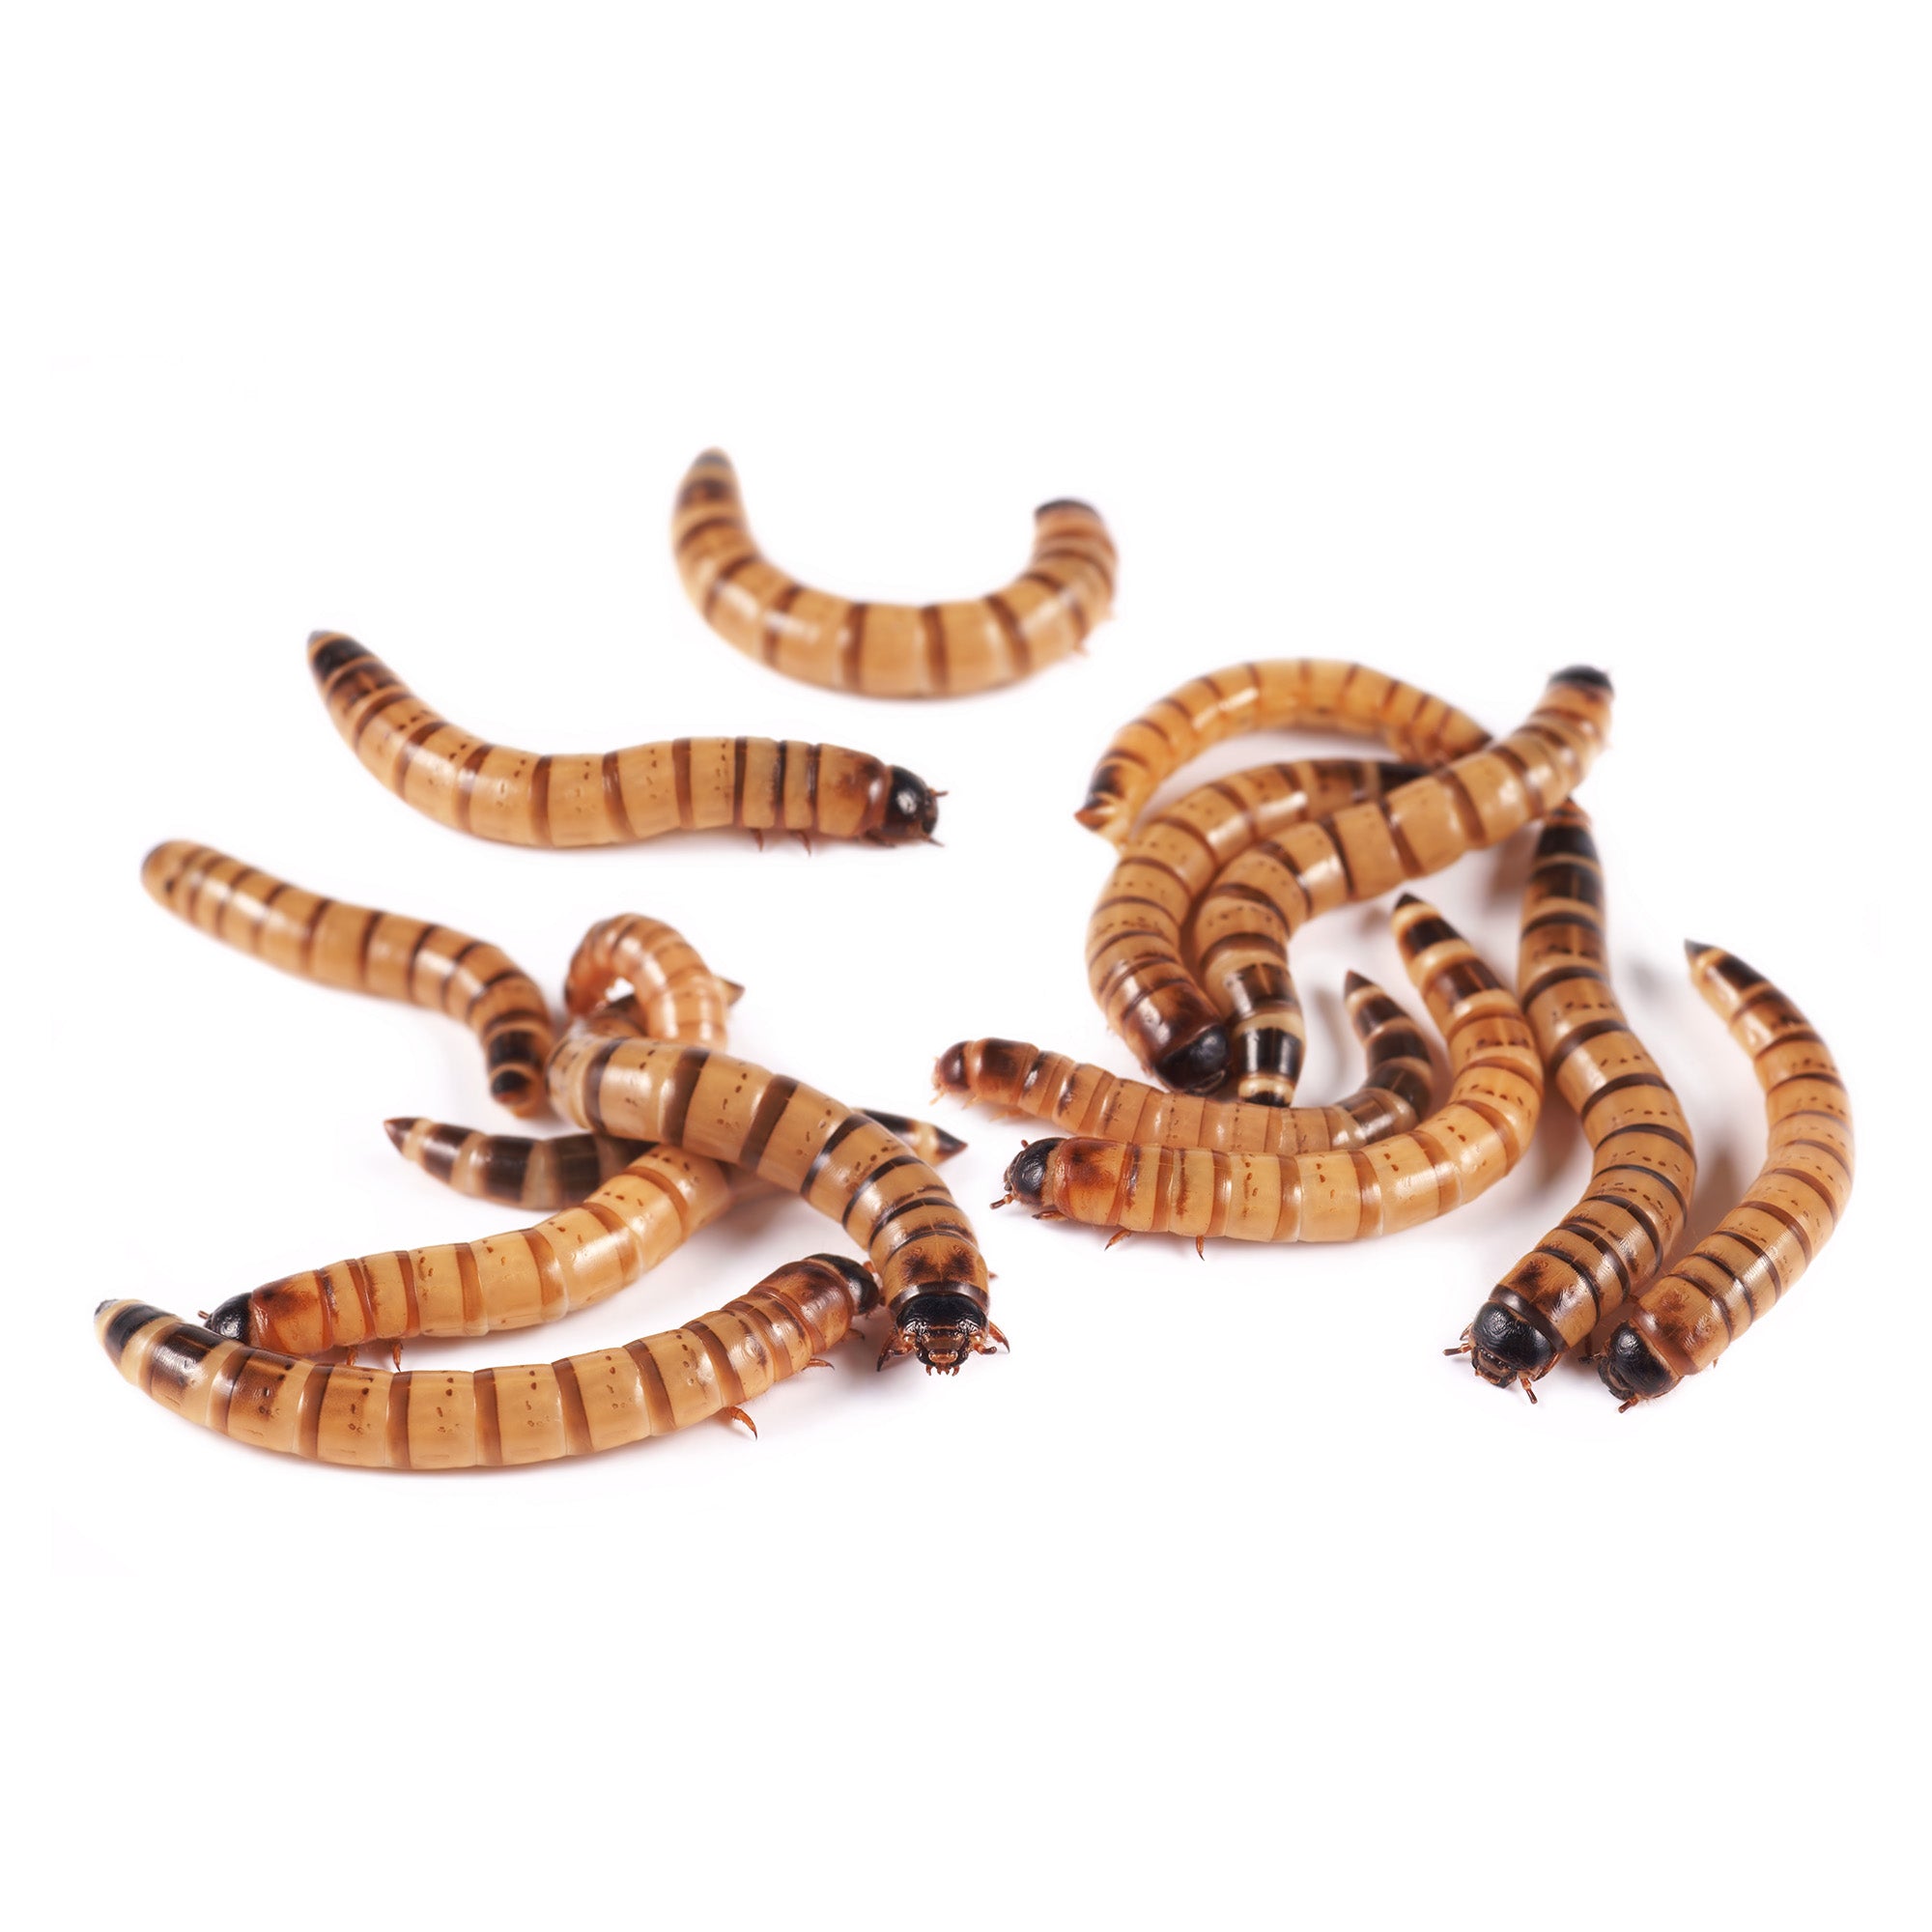 Kingworms (Giant Mealworms) - Super Cricket Farms